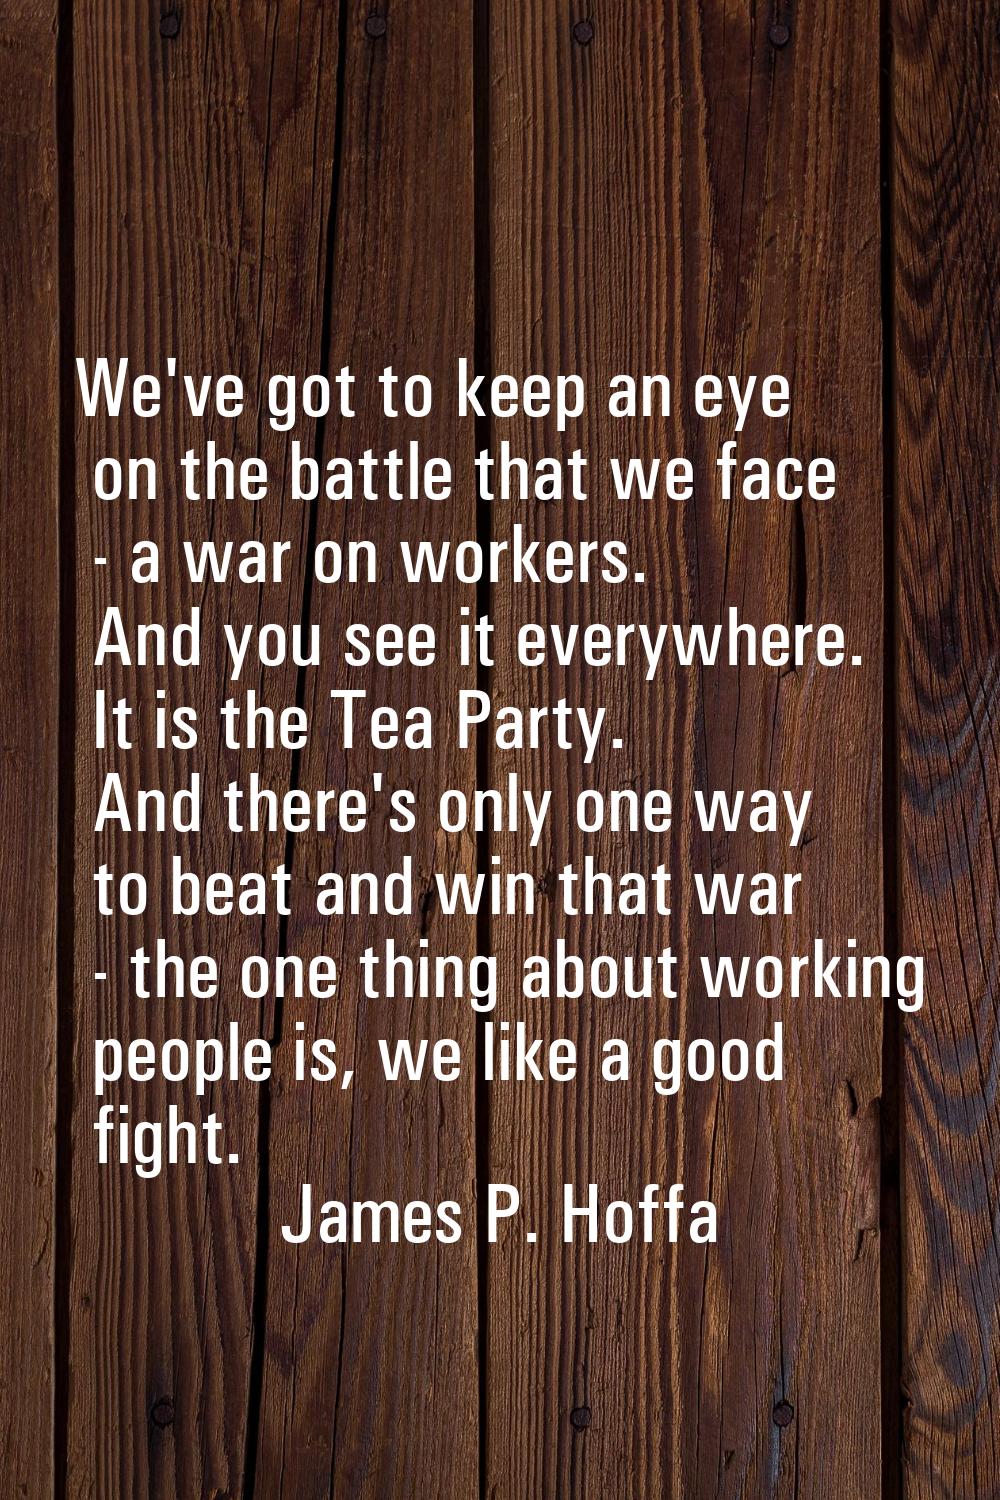 We've got to keep an eye on the battle that we face - a war on workers. And you see it everywhere. 